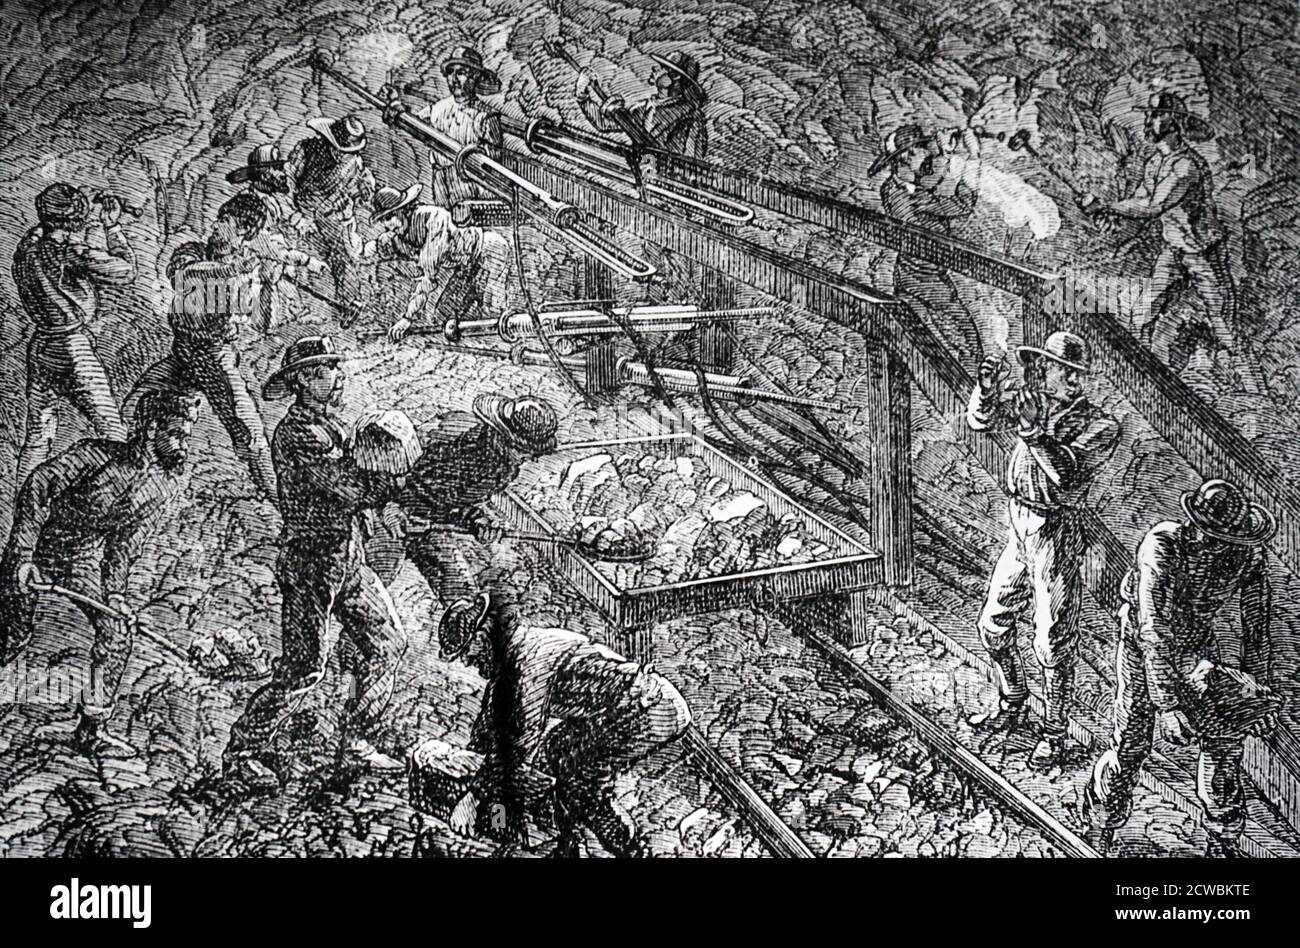 Engraving depicting workmen using a Burleigh compressed air drilling machine in the Hoosac Tunnel, the first rock tunnel in America. Stock Photo